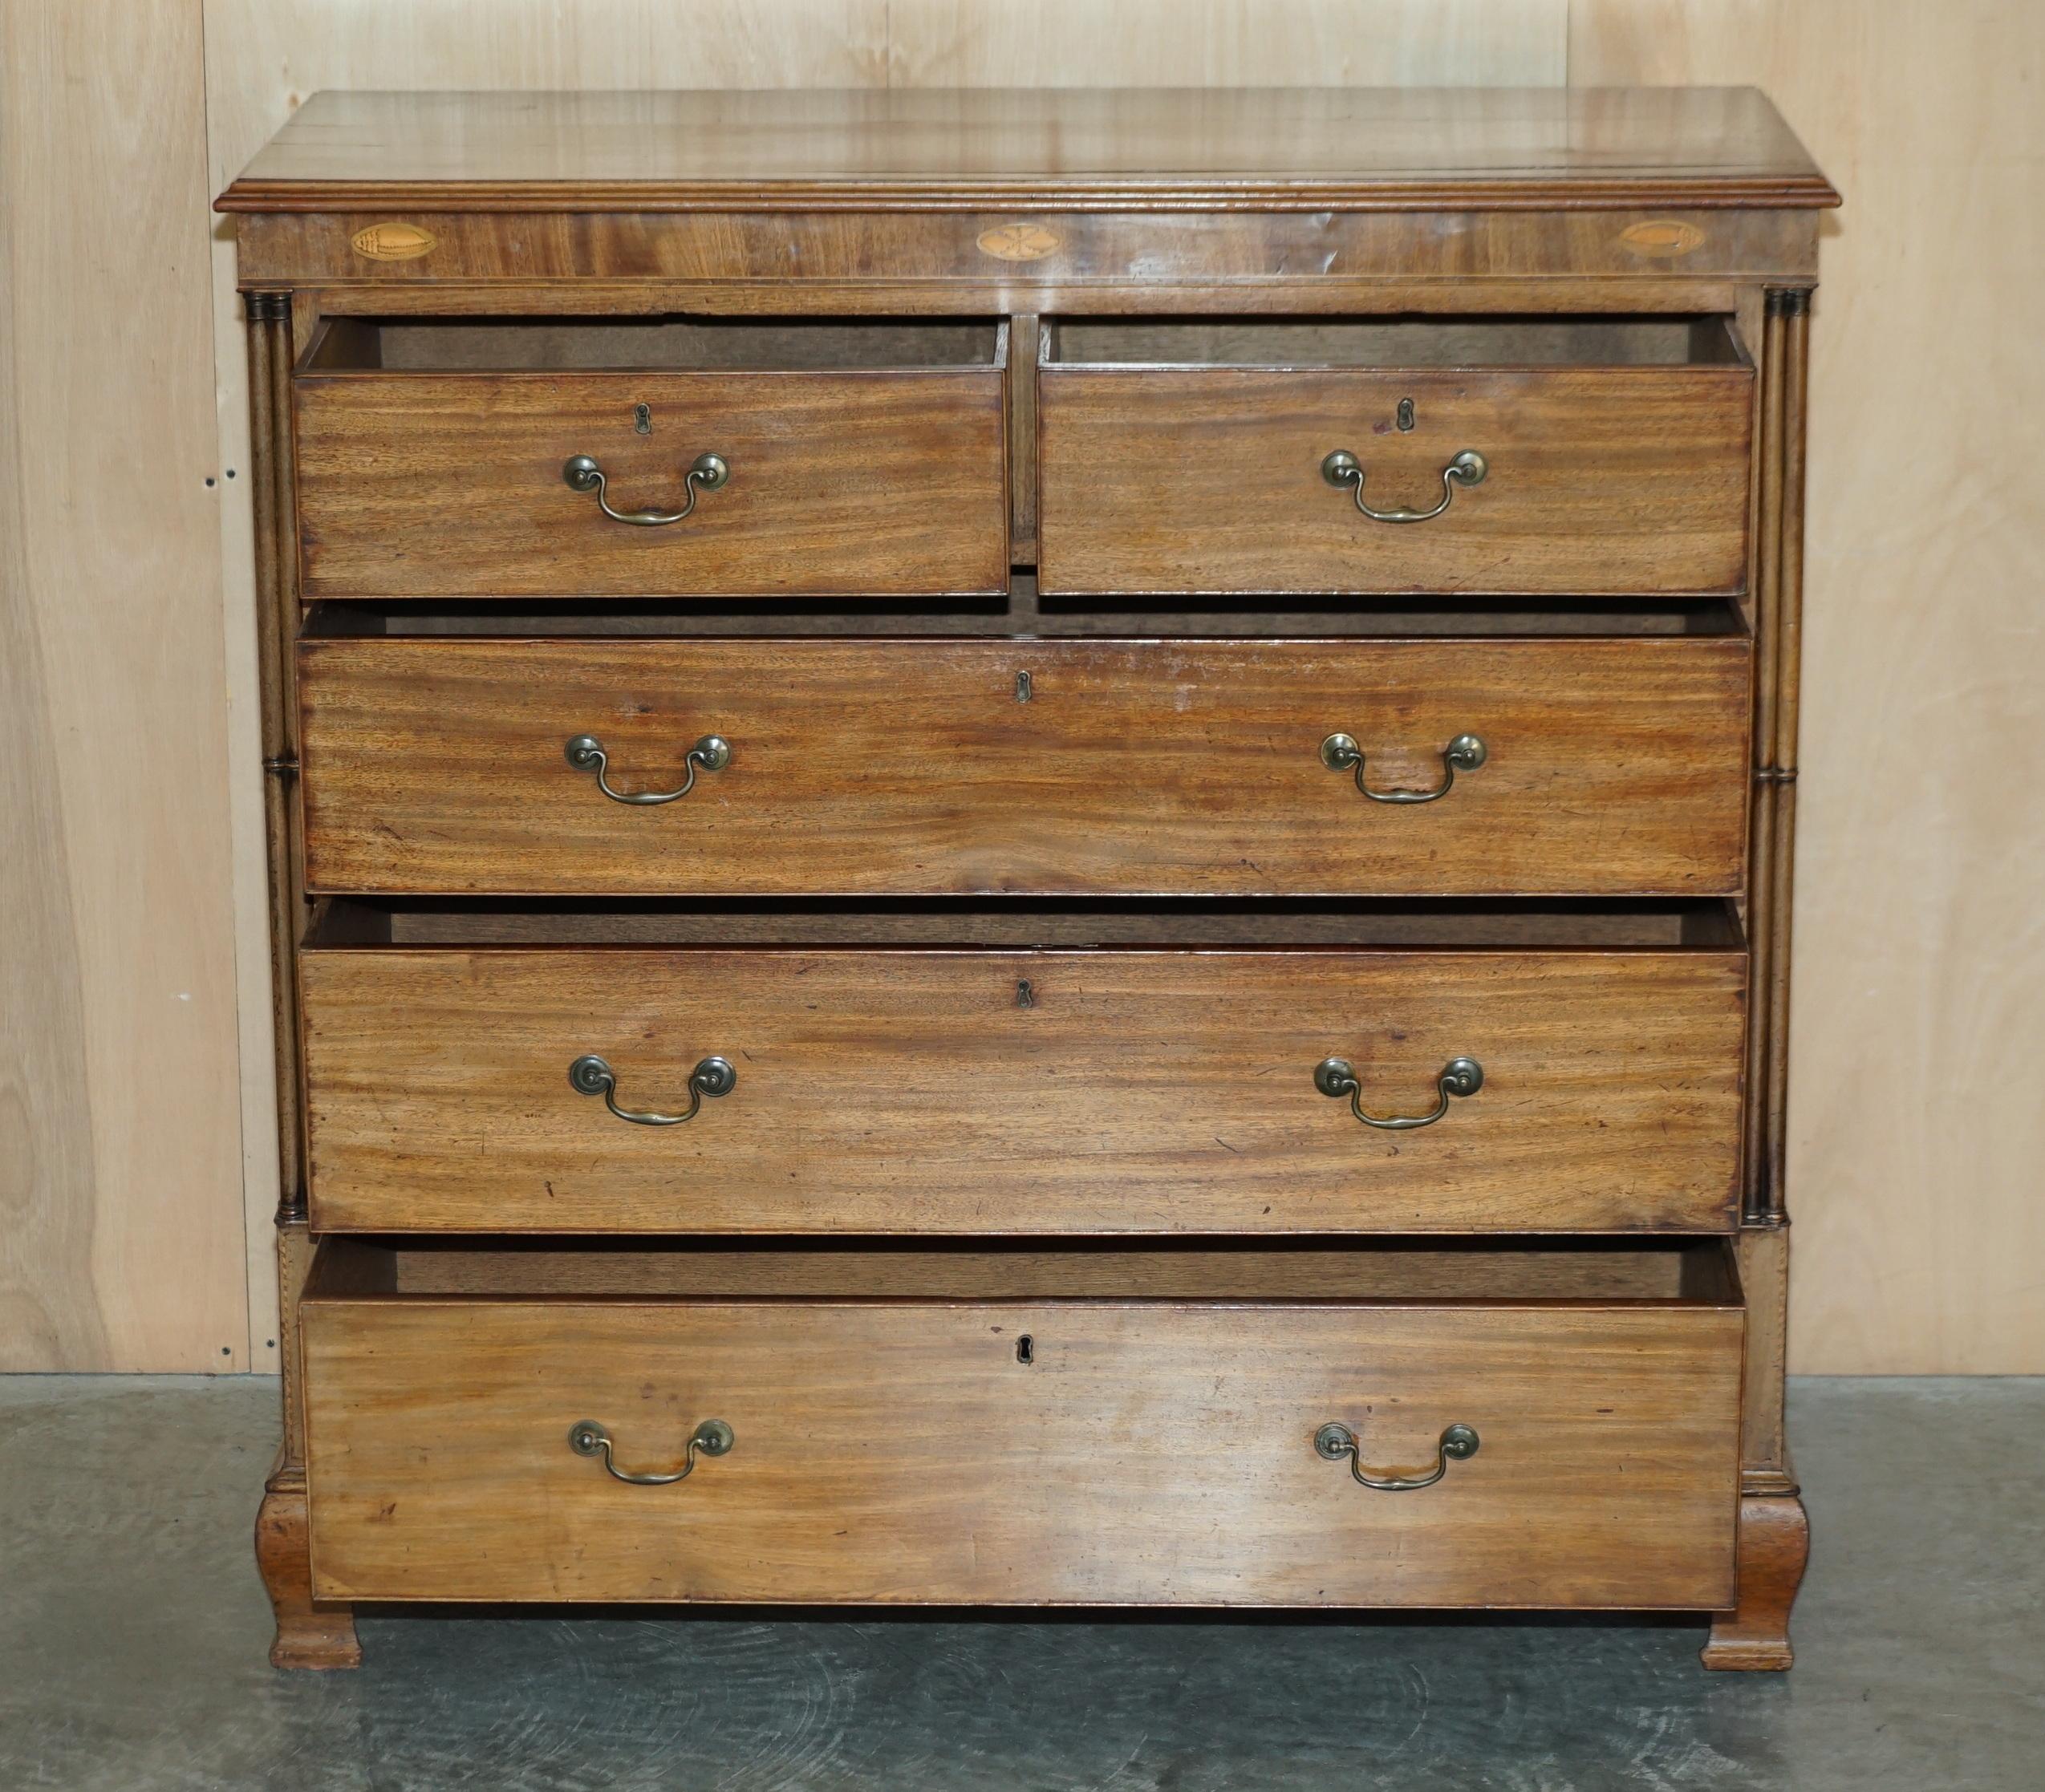 LARGE FiNE ANTIQUE THOMAS CHIPPENDALE SHERATON REVIVAL HARDWOOD CHEST OF DRAWERS im Angebot 12